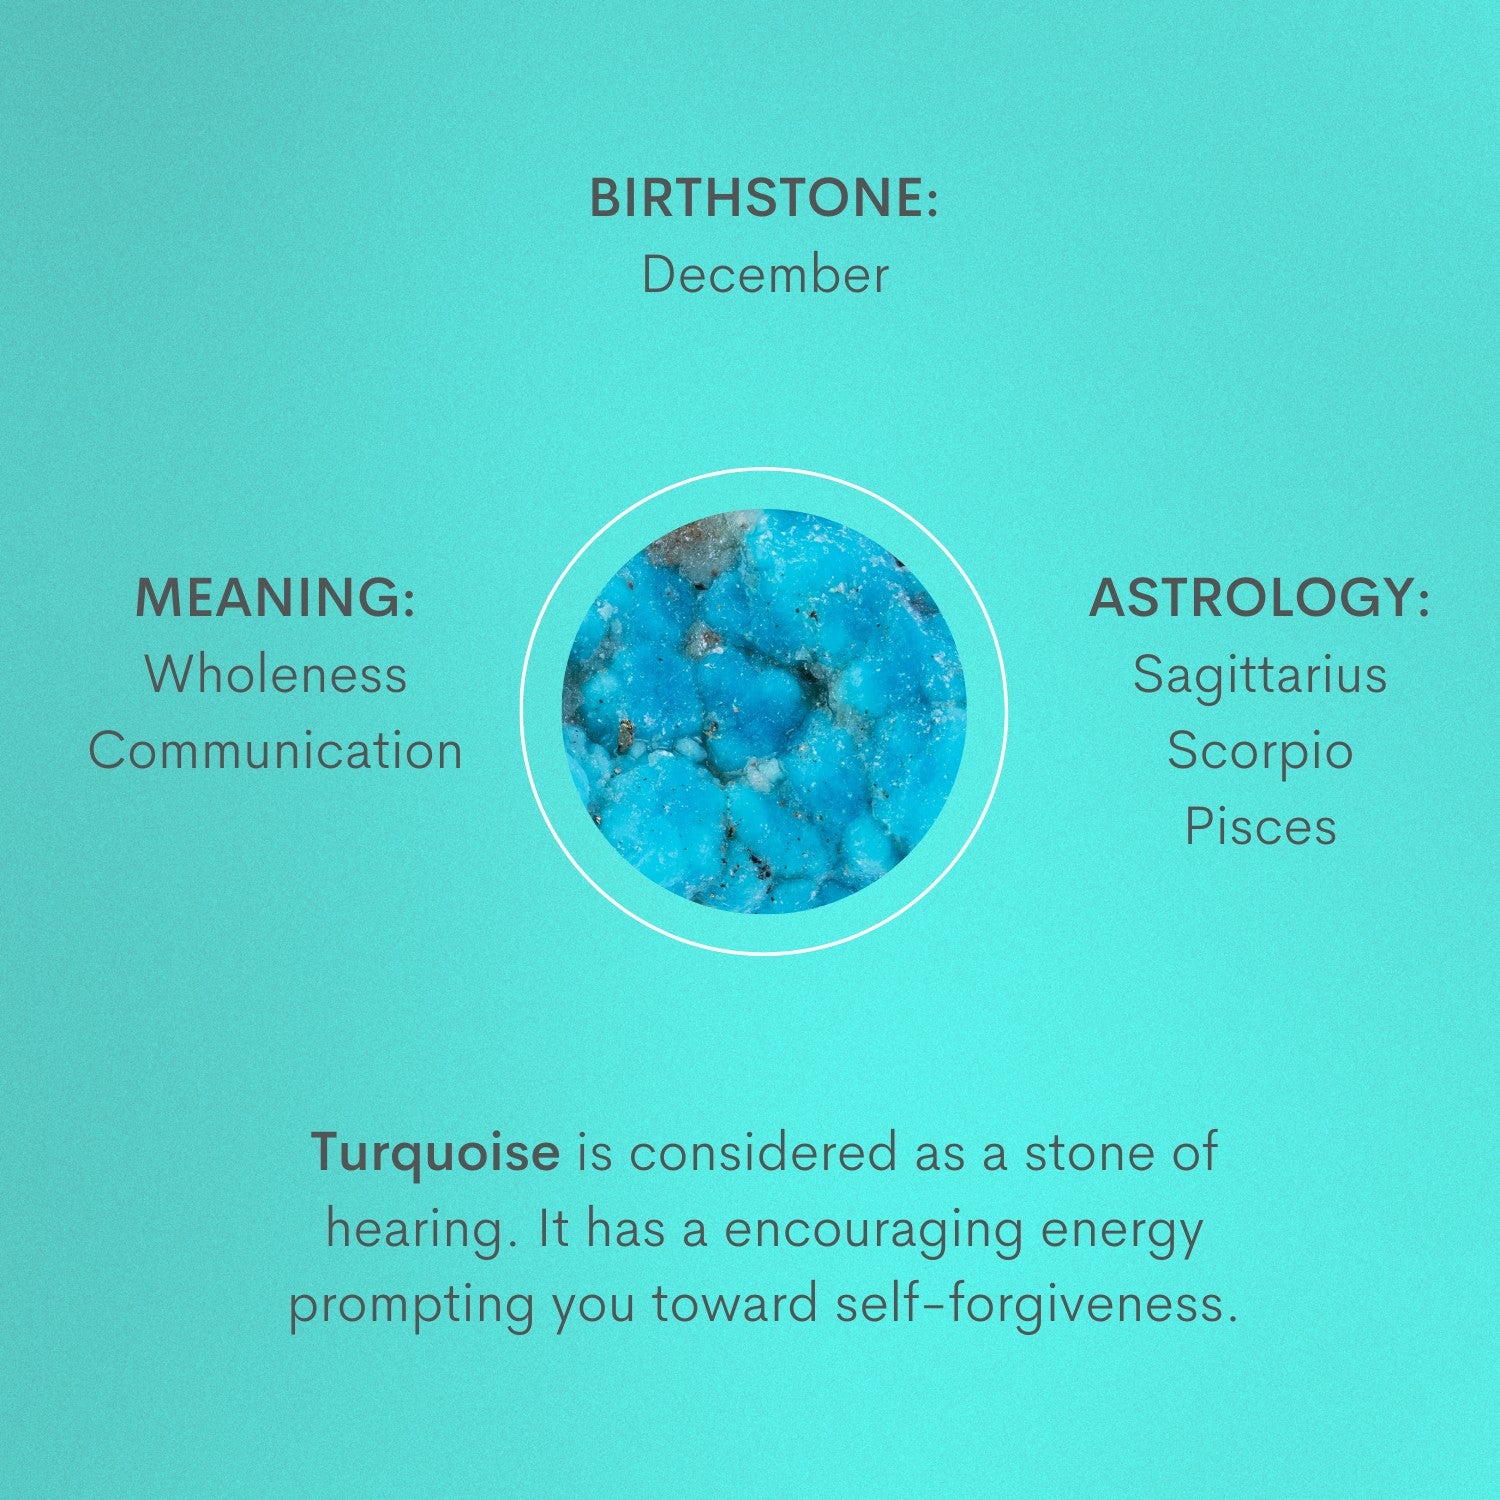 Turquoise is considered as a stone of hearing. It has a powerfully encouraging energy prompting you toward self-forgiveness and self-acceptance.